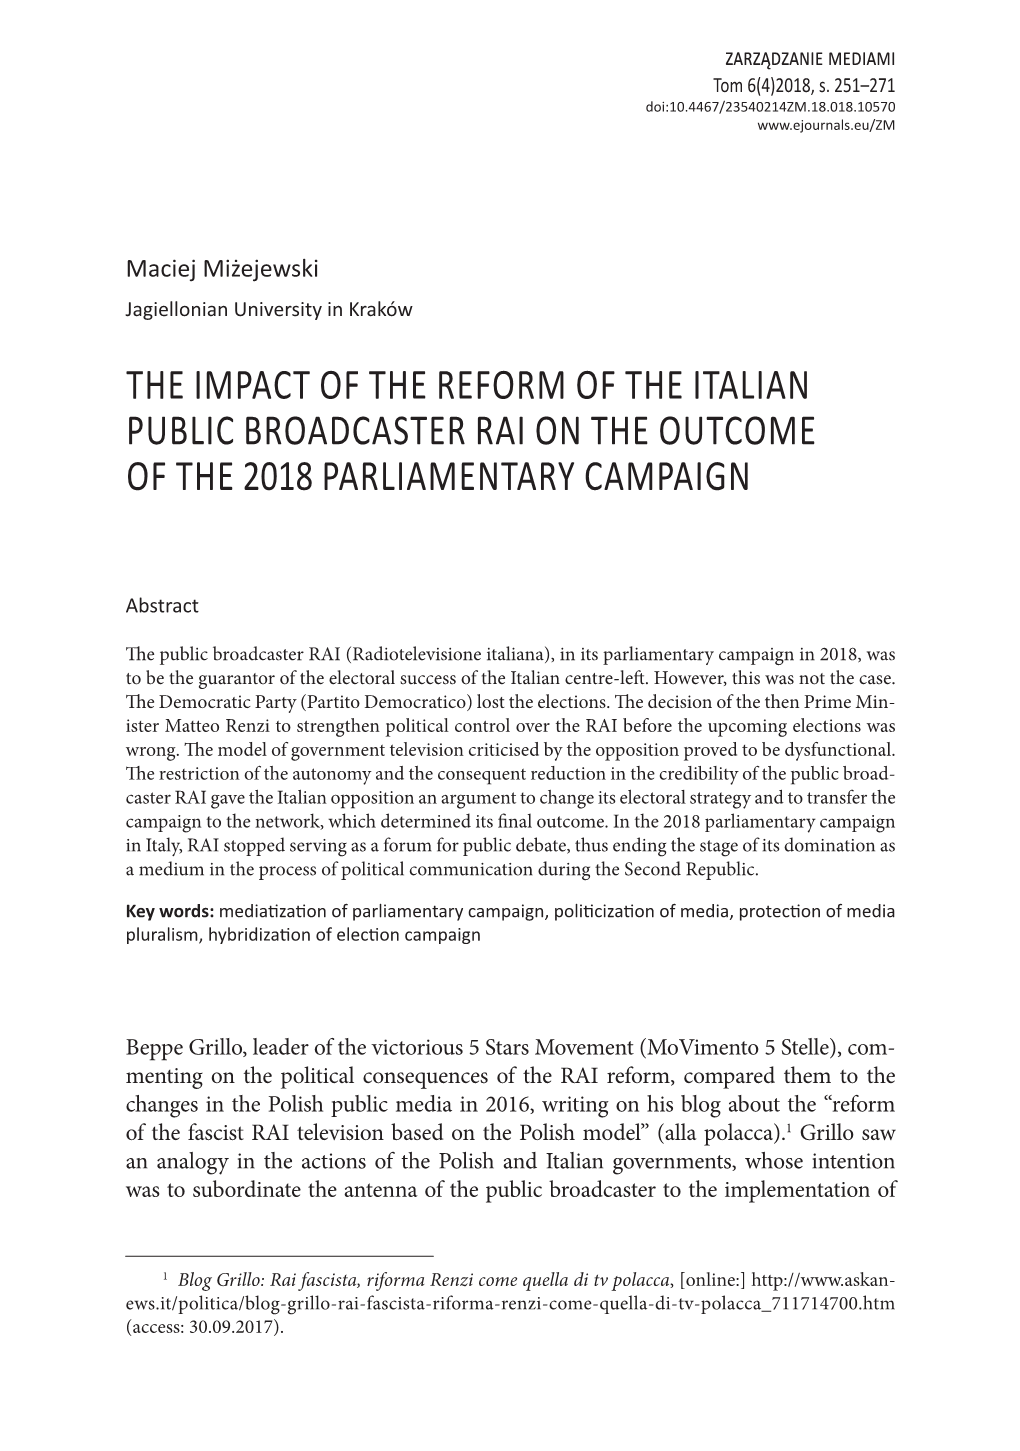 The Impact of the Reform of the Italian Public Broadcaster Rai on the Outcome of the 2018 Parliamentary Campaign